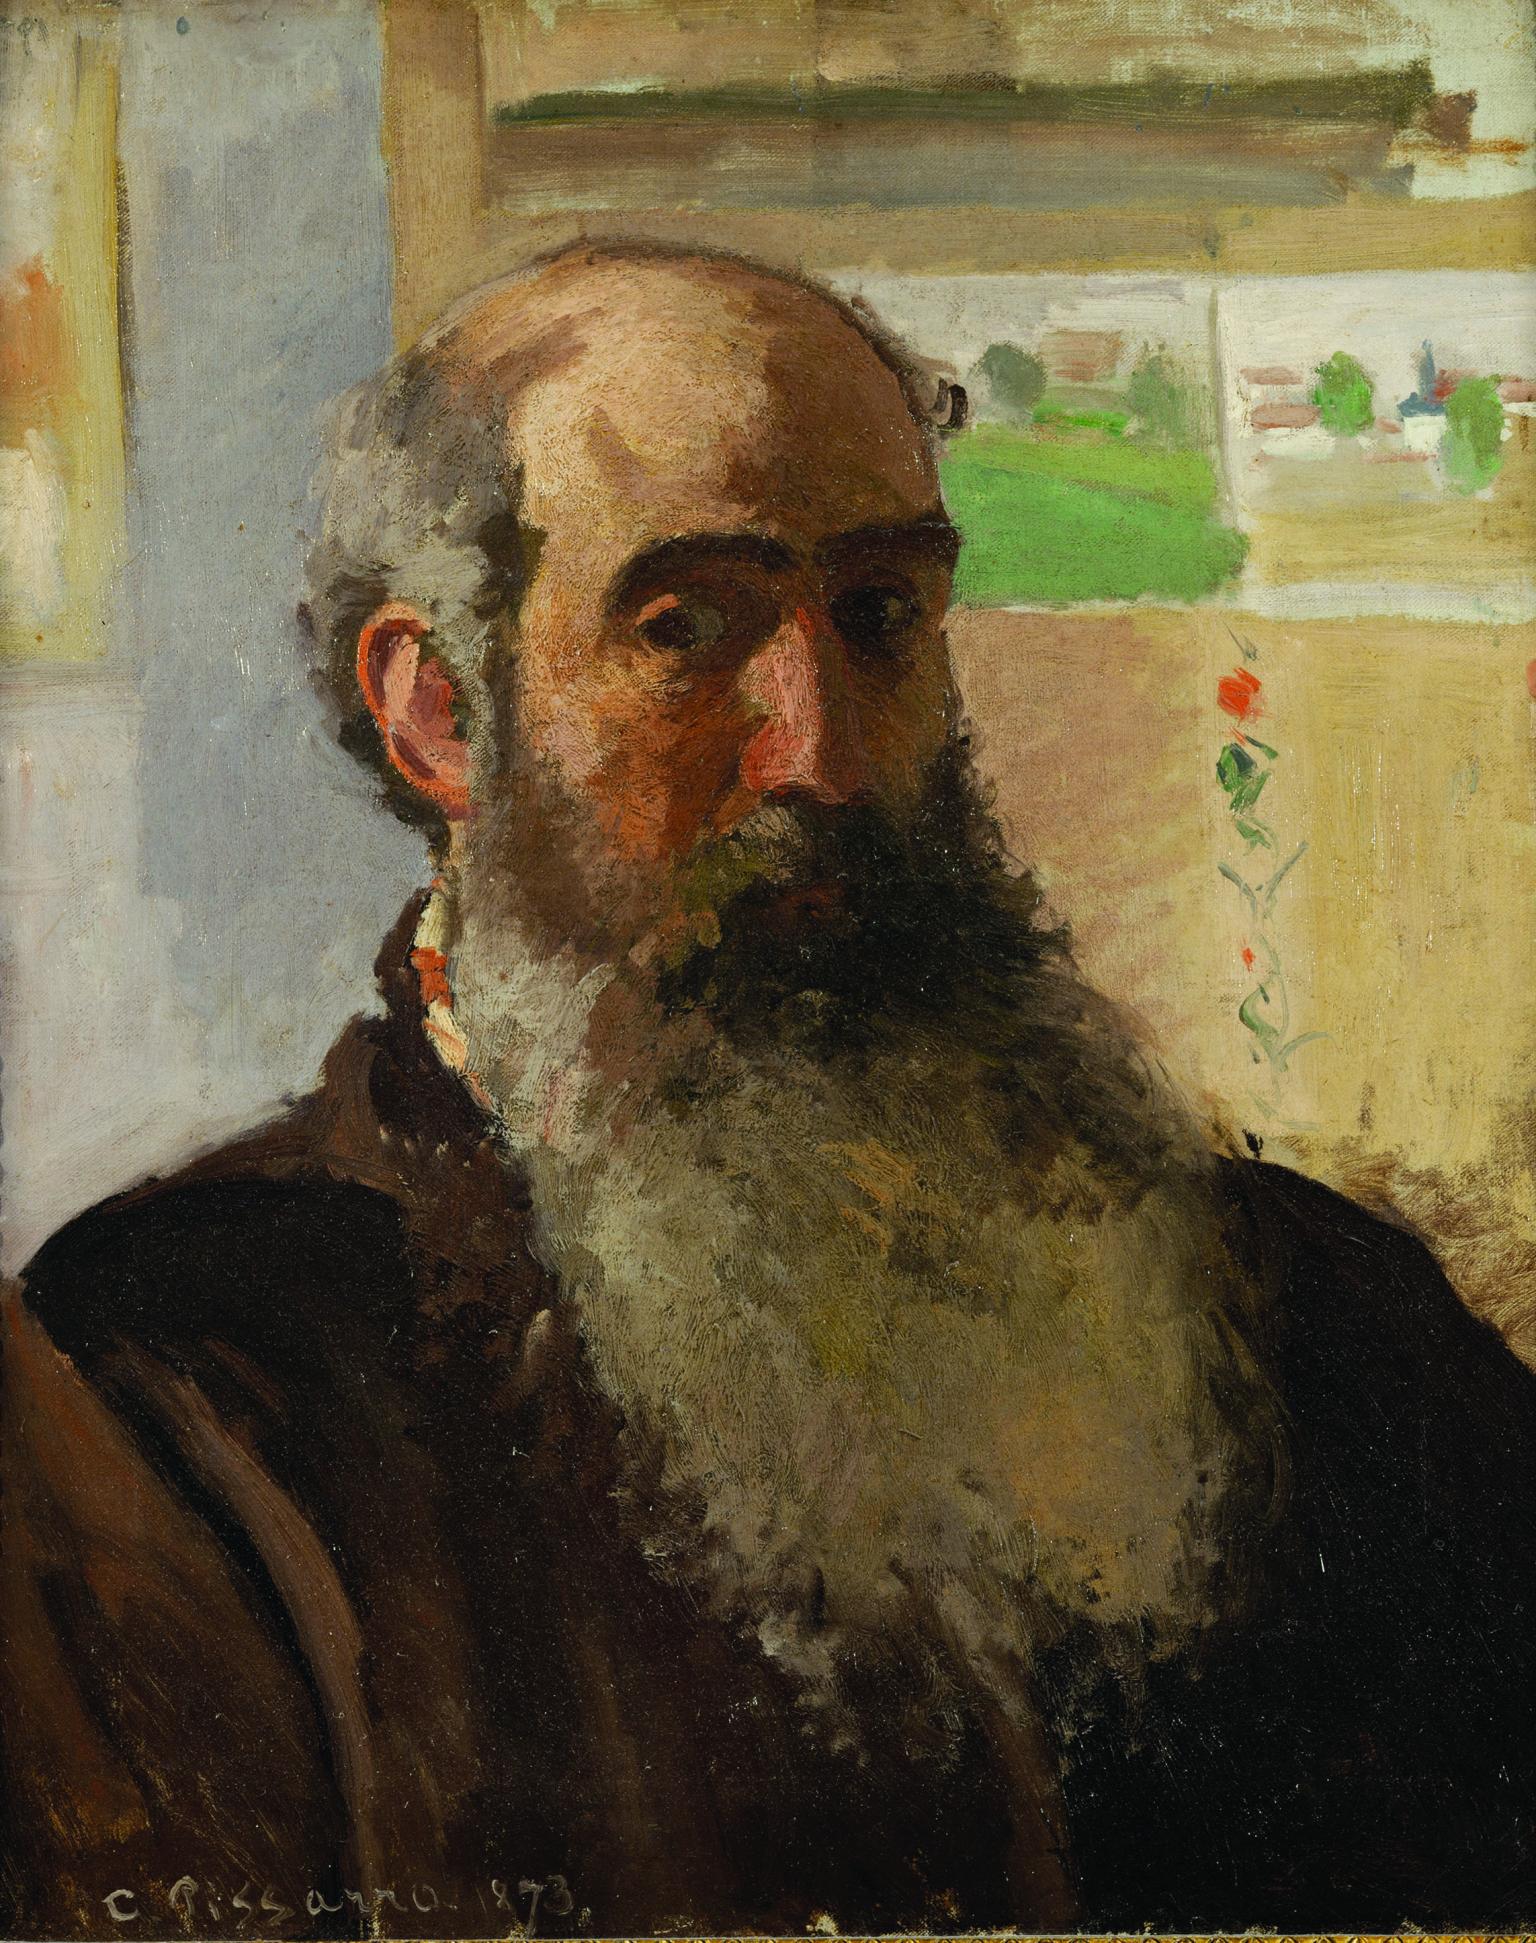 Self-portrait painting of bearded man facing viewer.